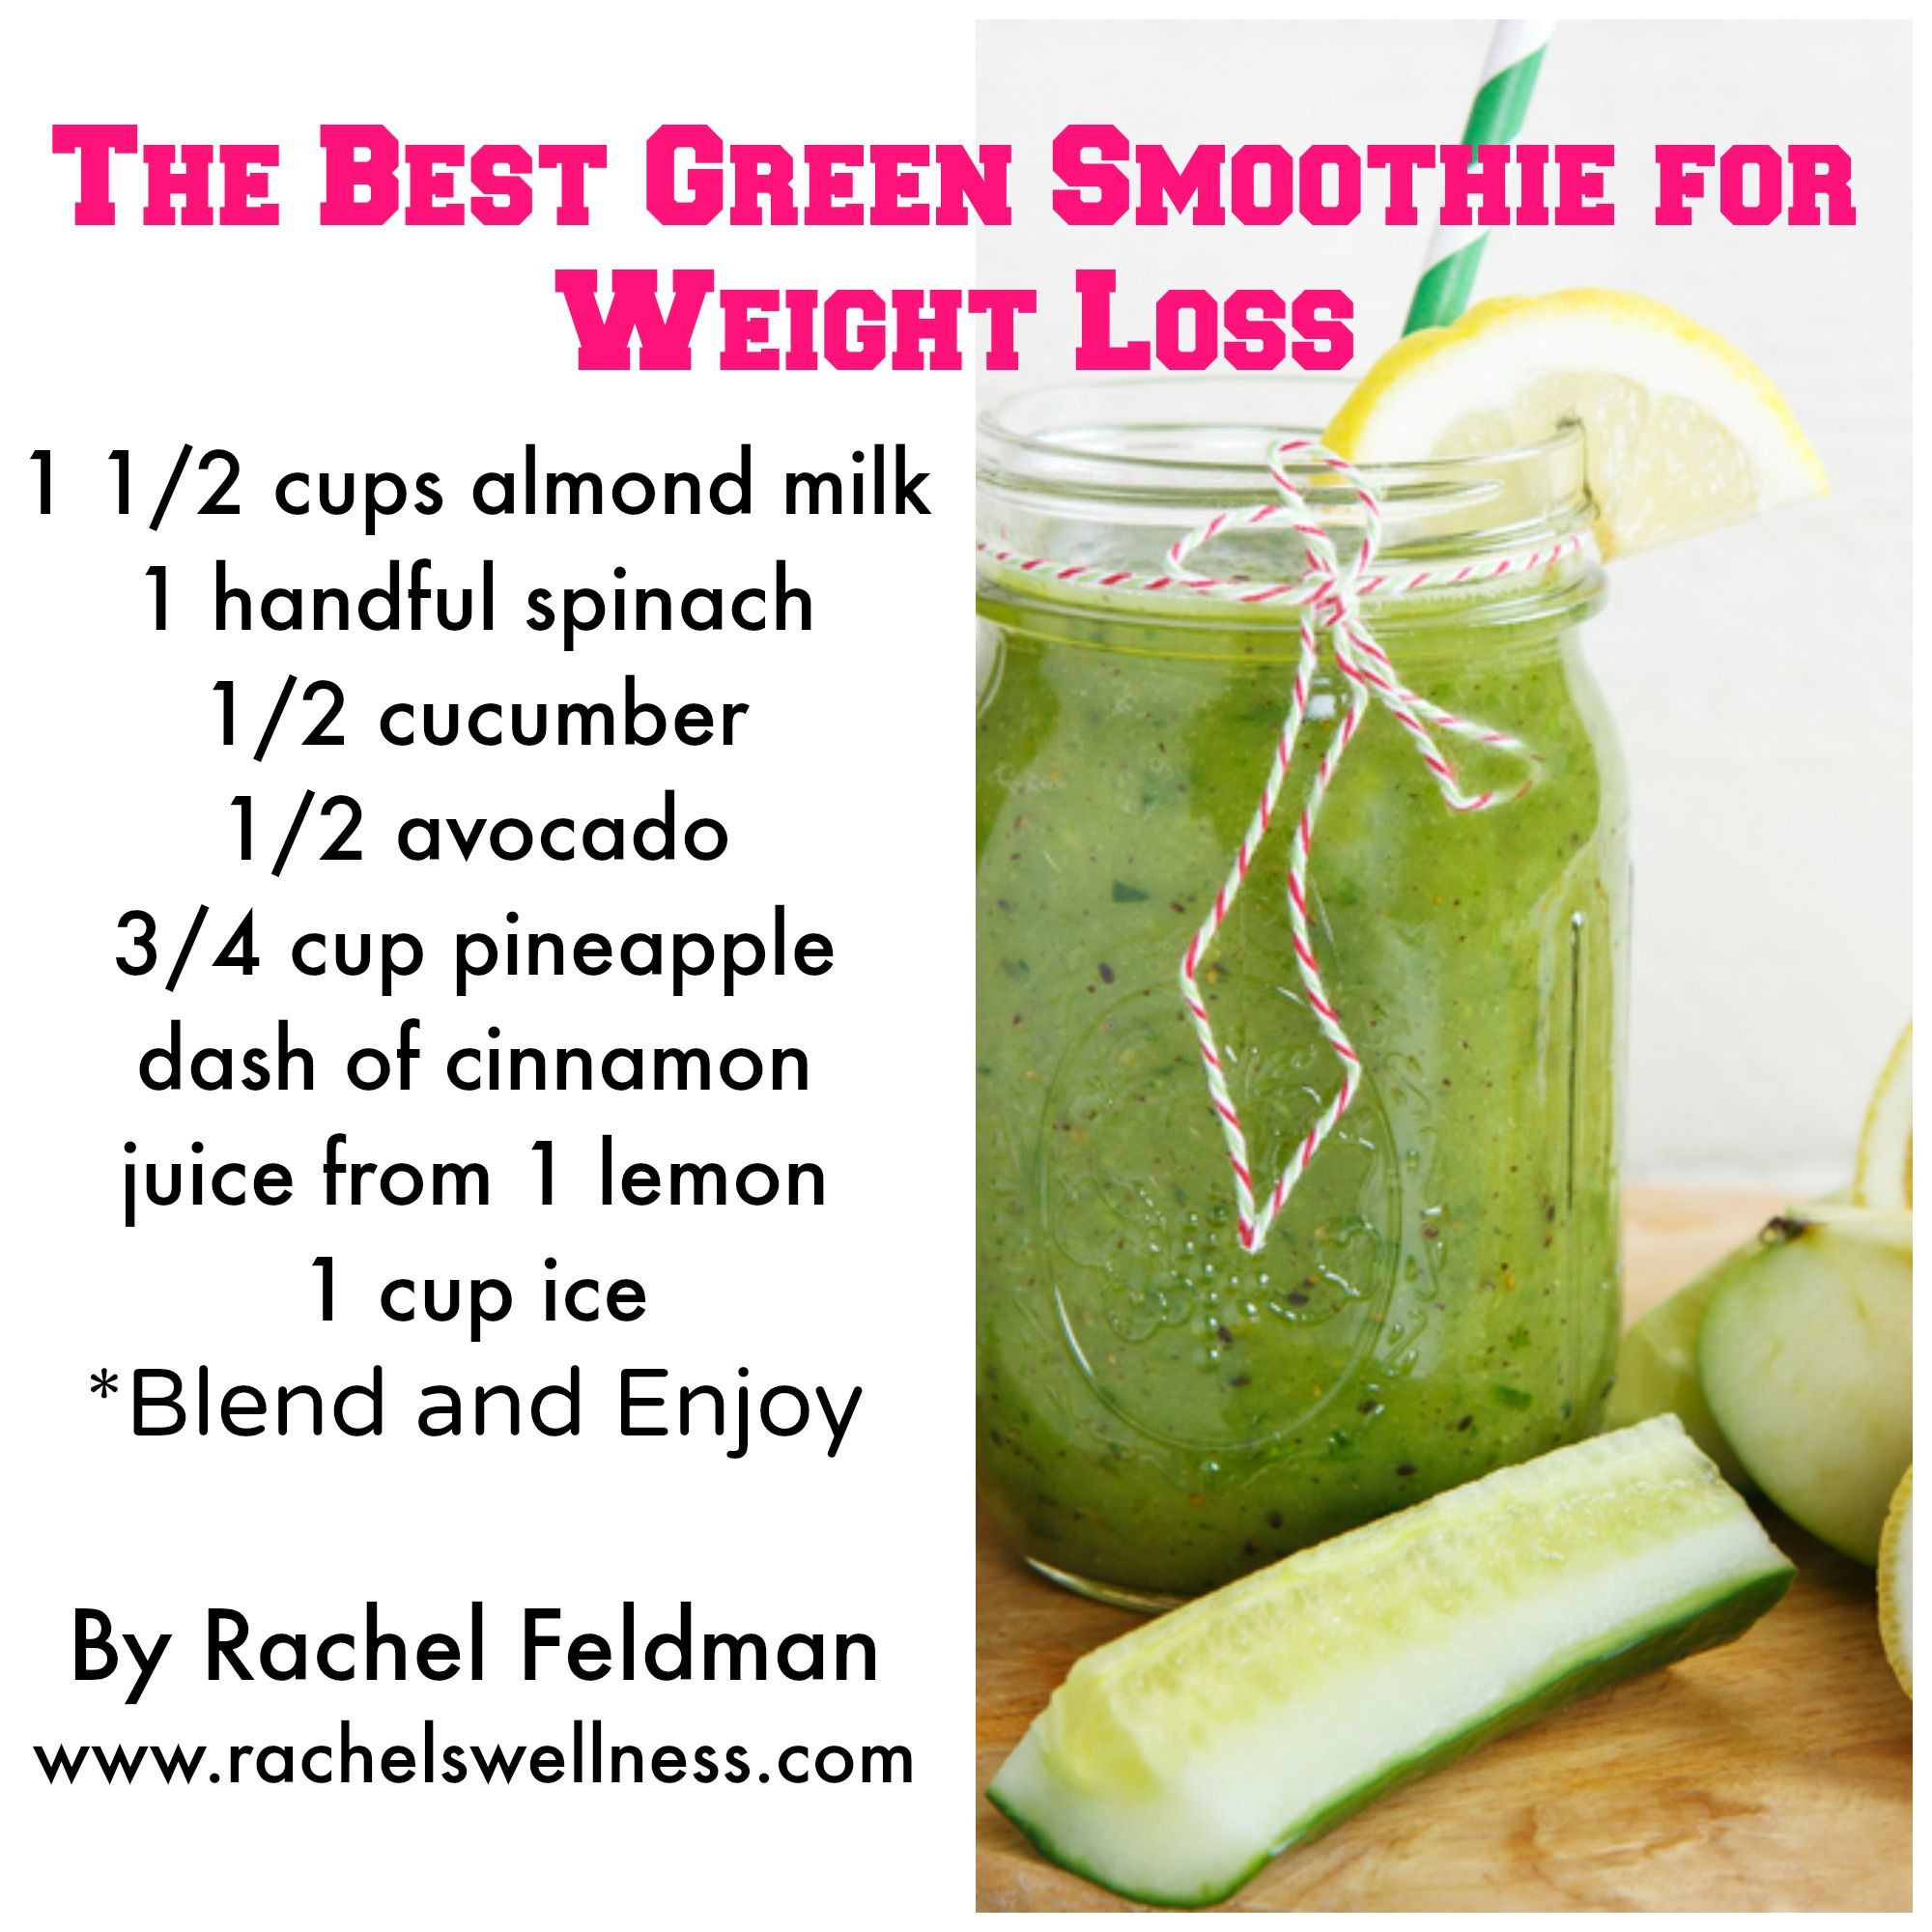 Healthy Morning Smoothies For Weight Loss
 7 Healthy Green Smoothie Recipes For Weight Loss